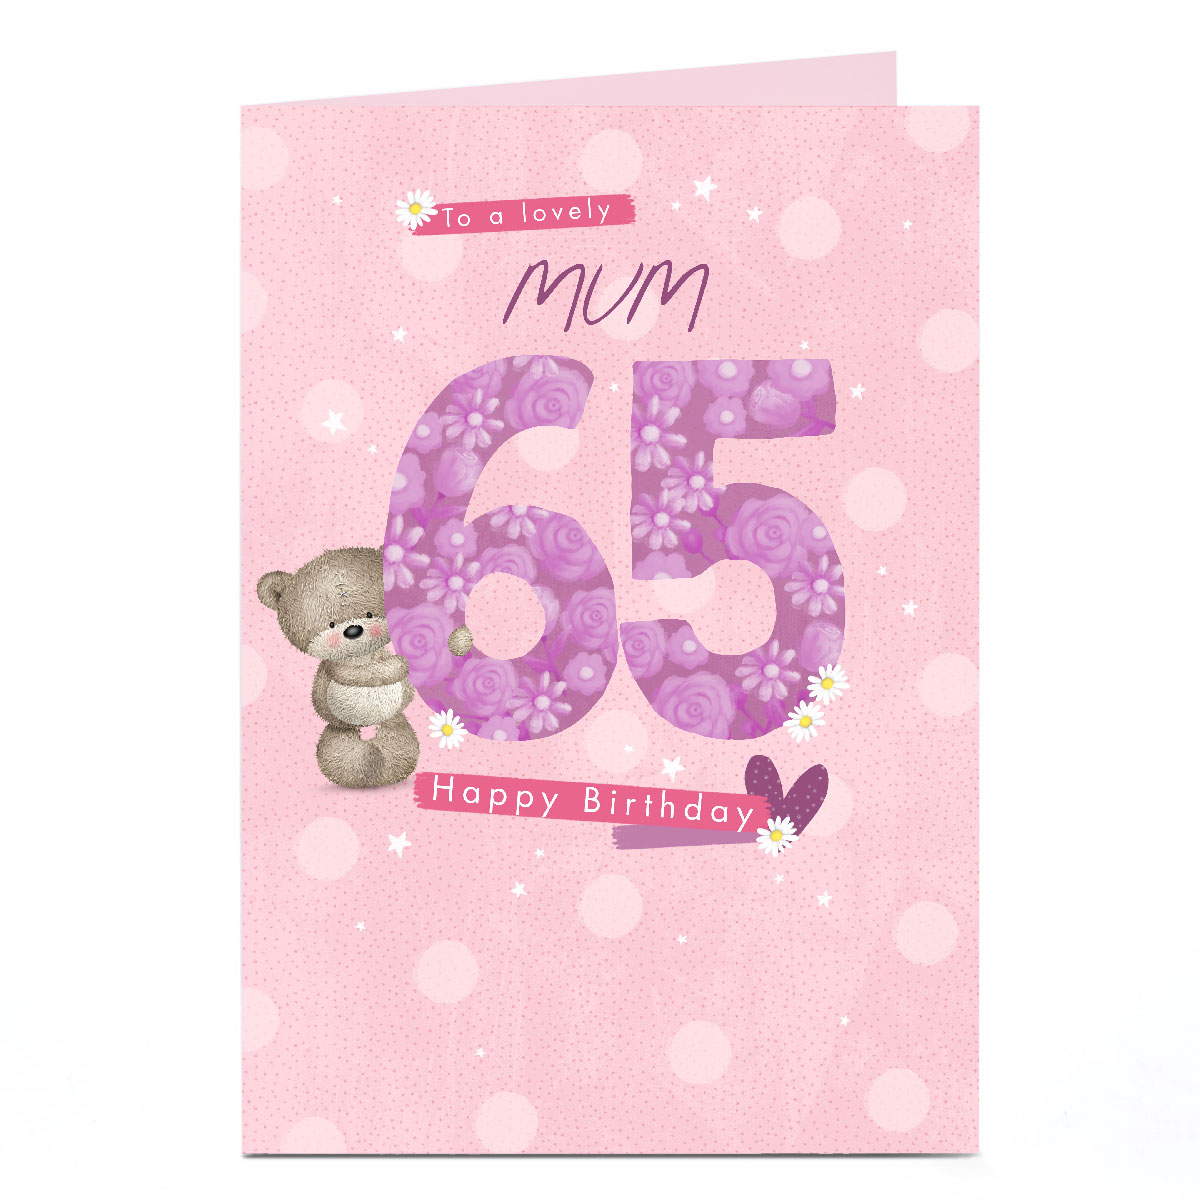 Personalised Hugs Birthday Card - 65th Birthday To A Lovely...